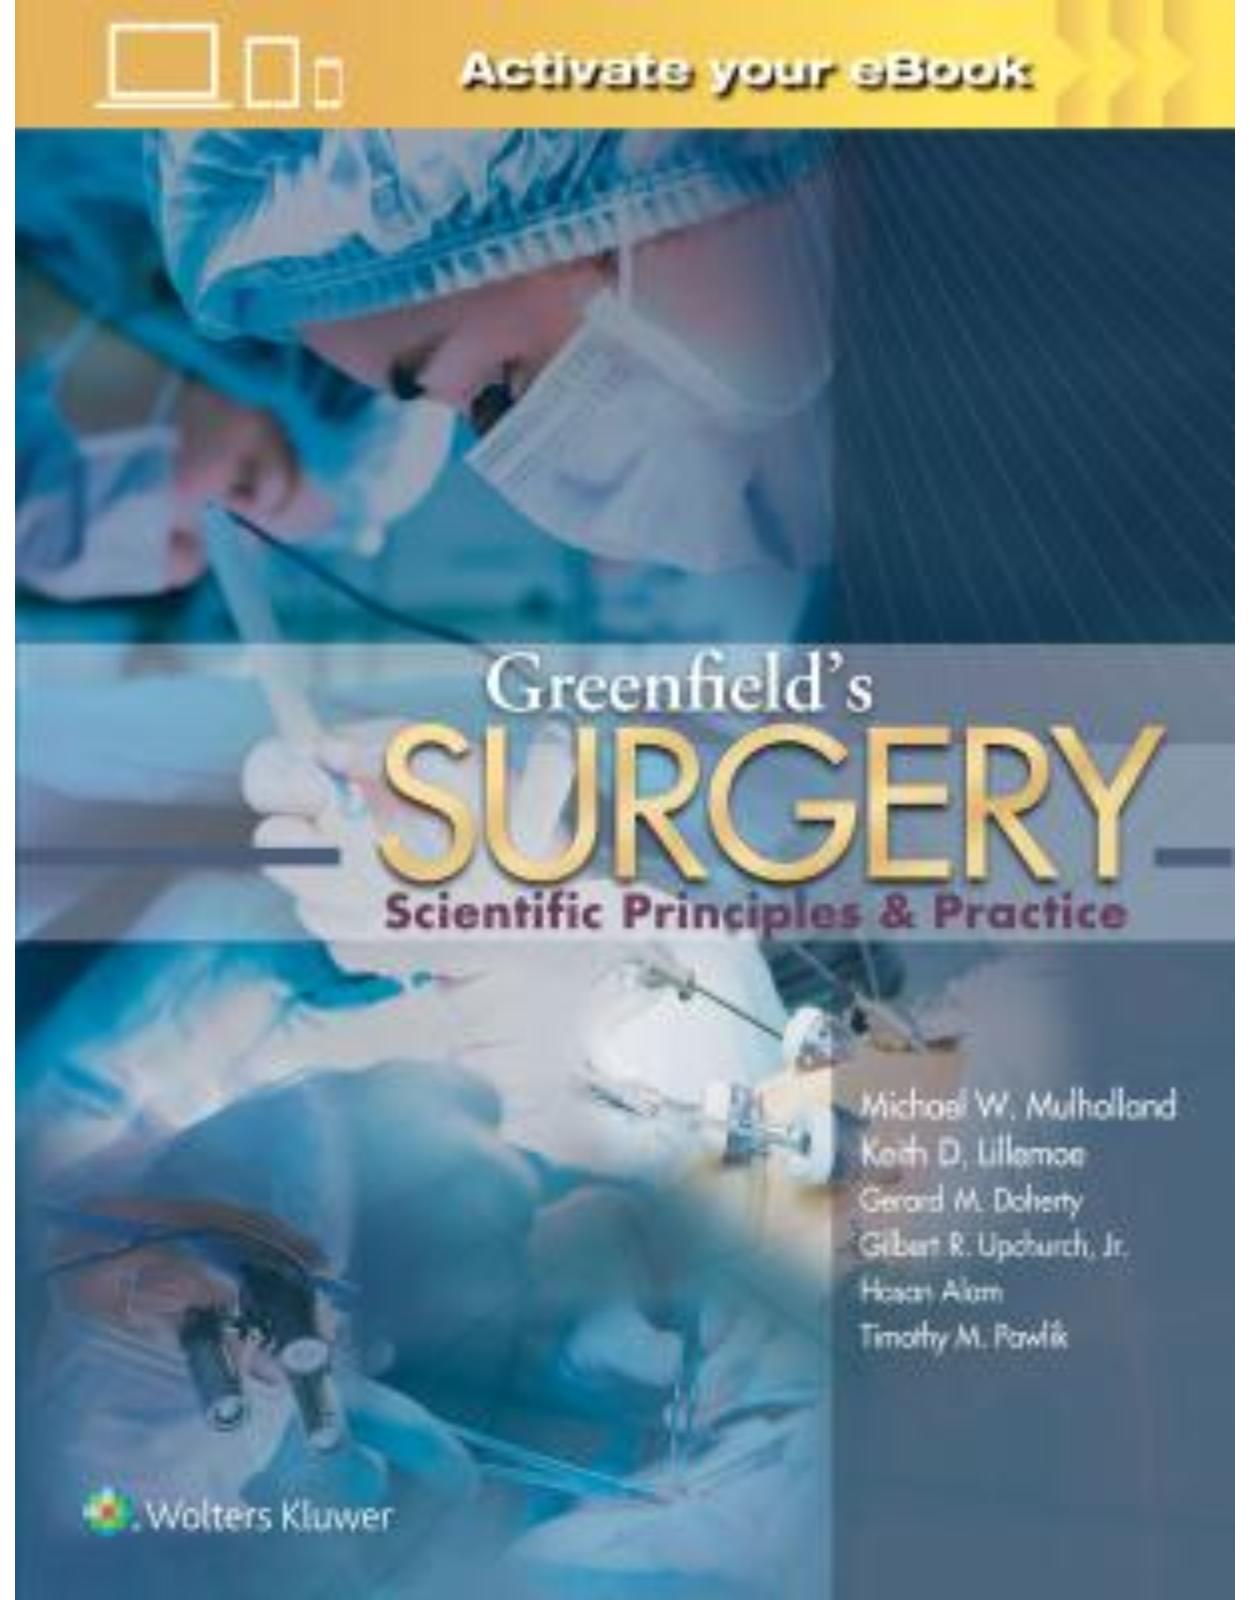  Greenfield's Surgery, 6e SCIENTIFIC PRINCIPLES AND PRACTICE